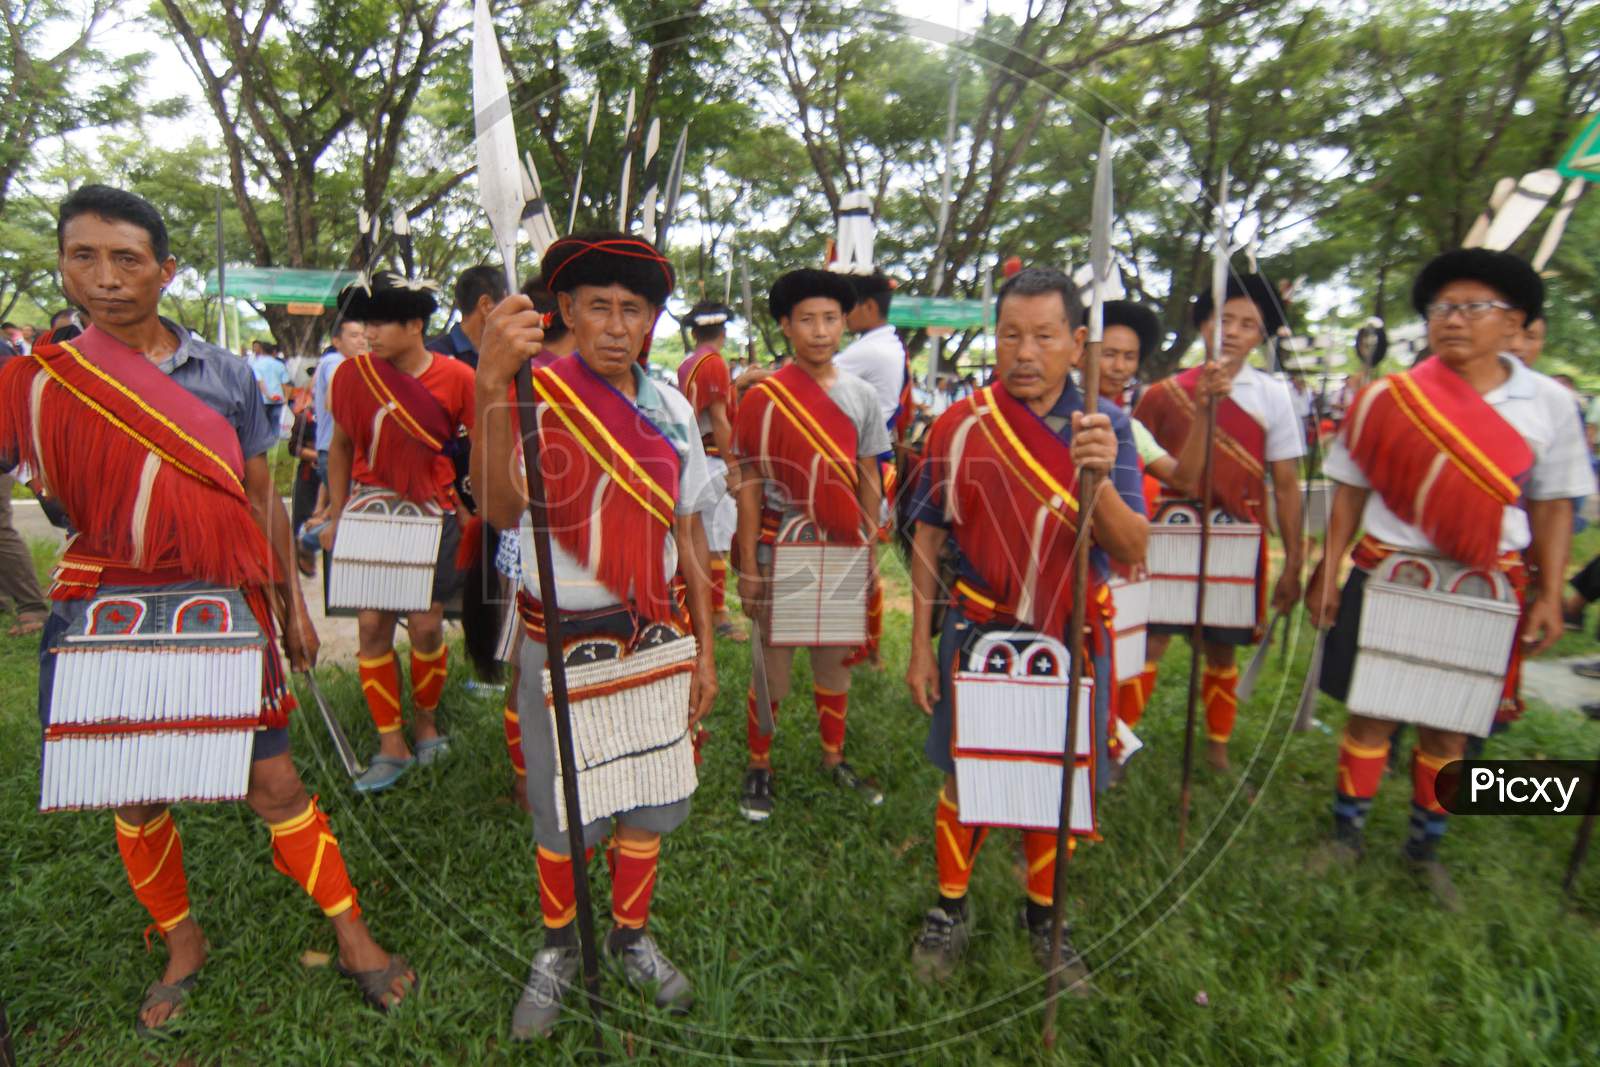 Naga Tribal People in Their Traditional Attire